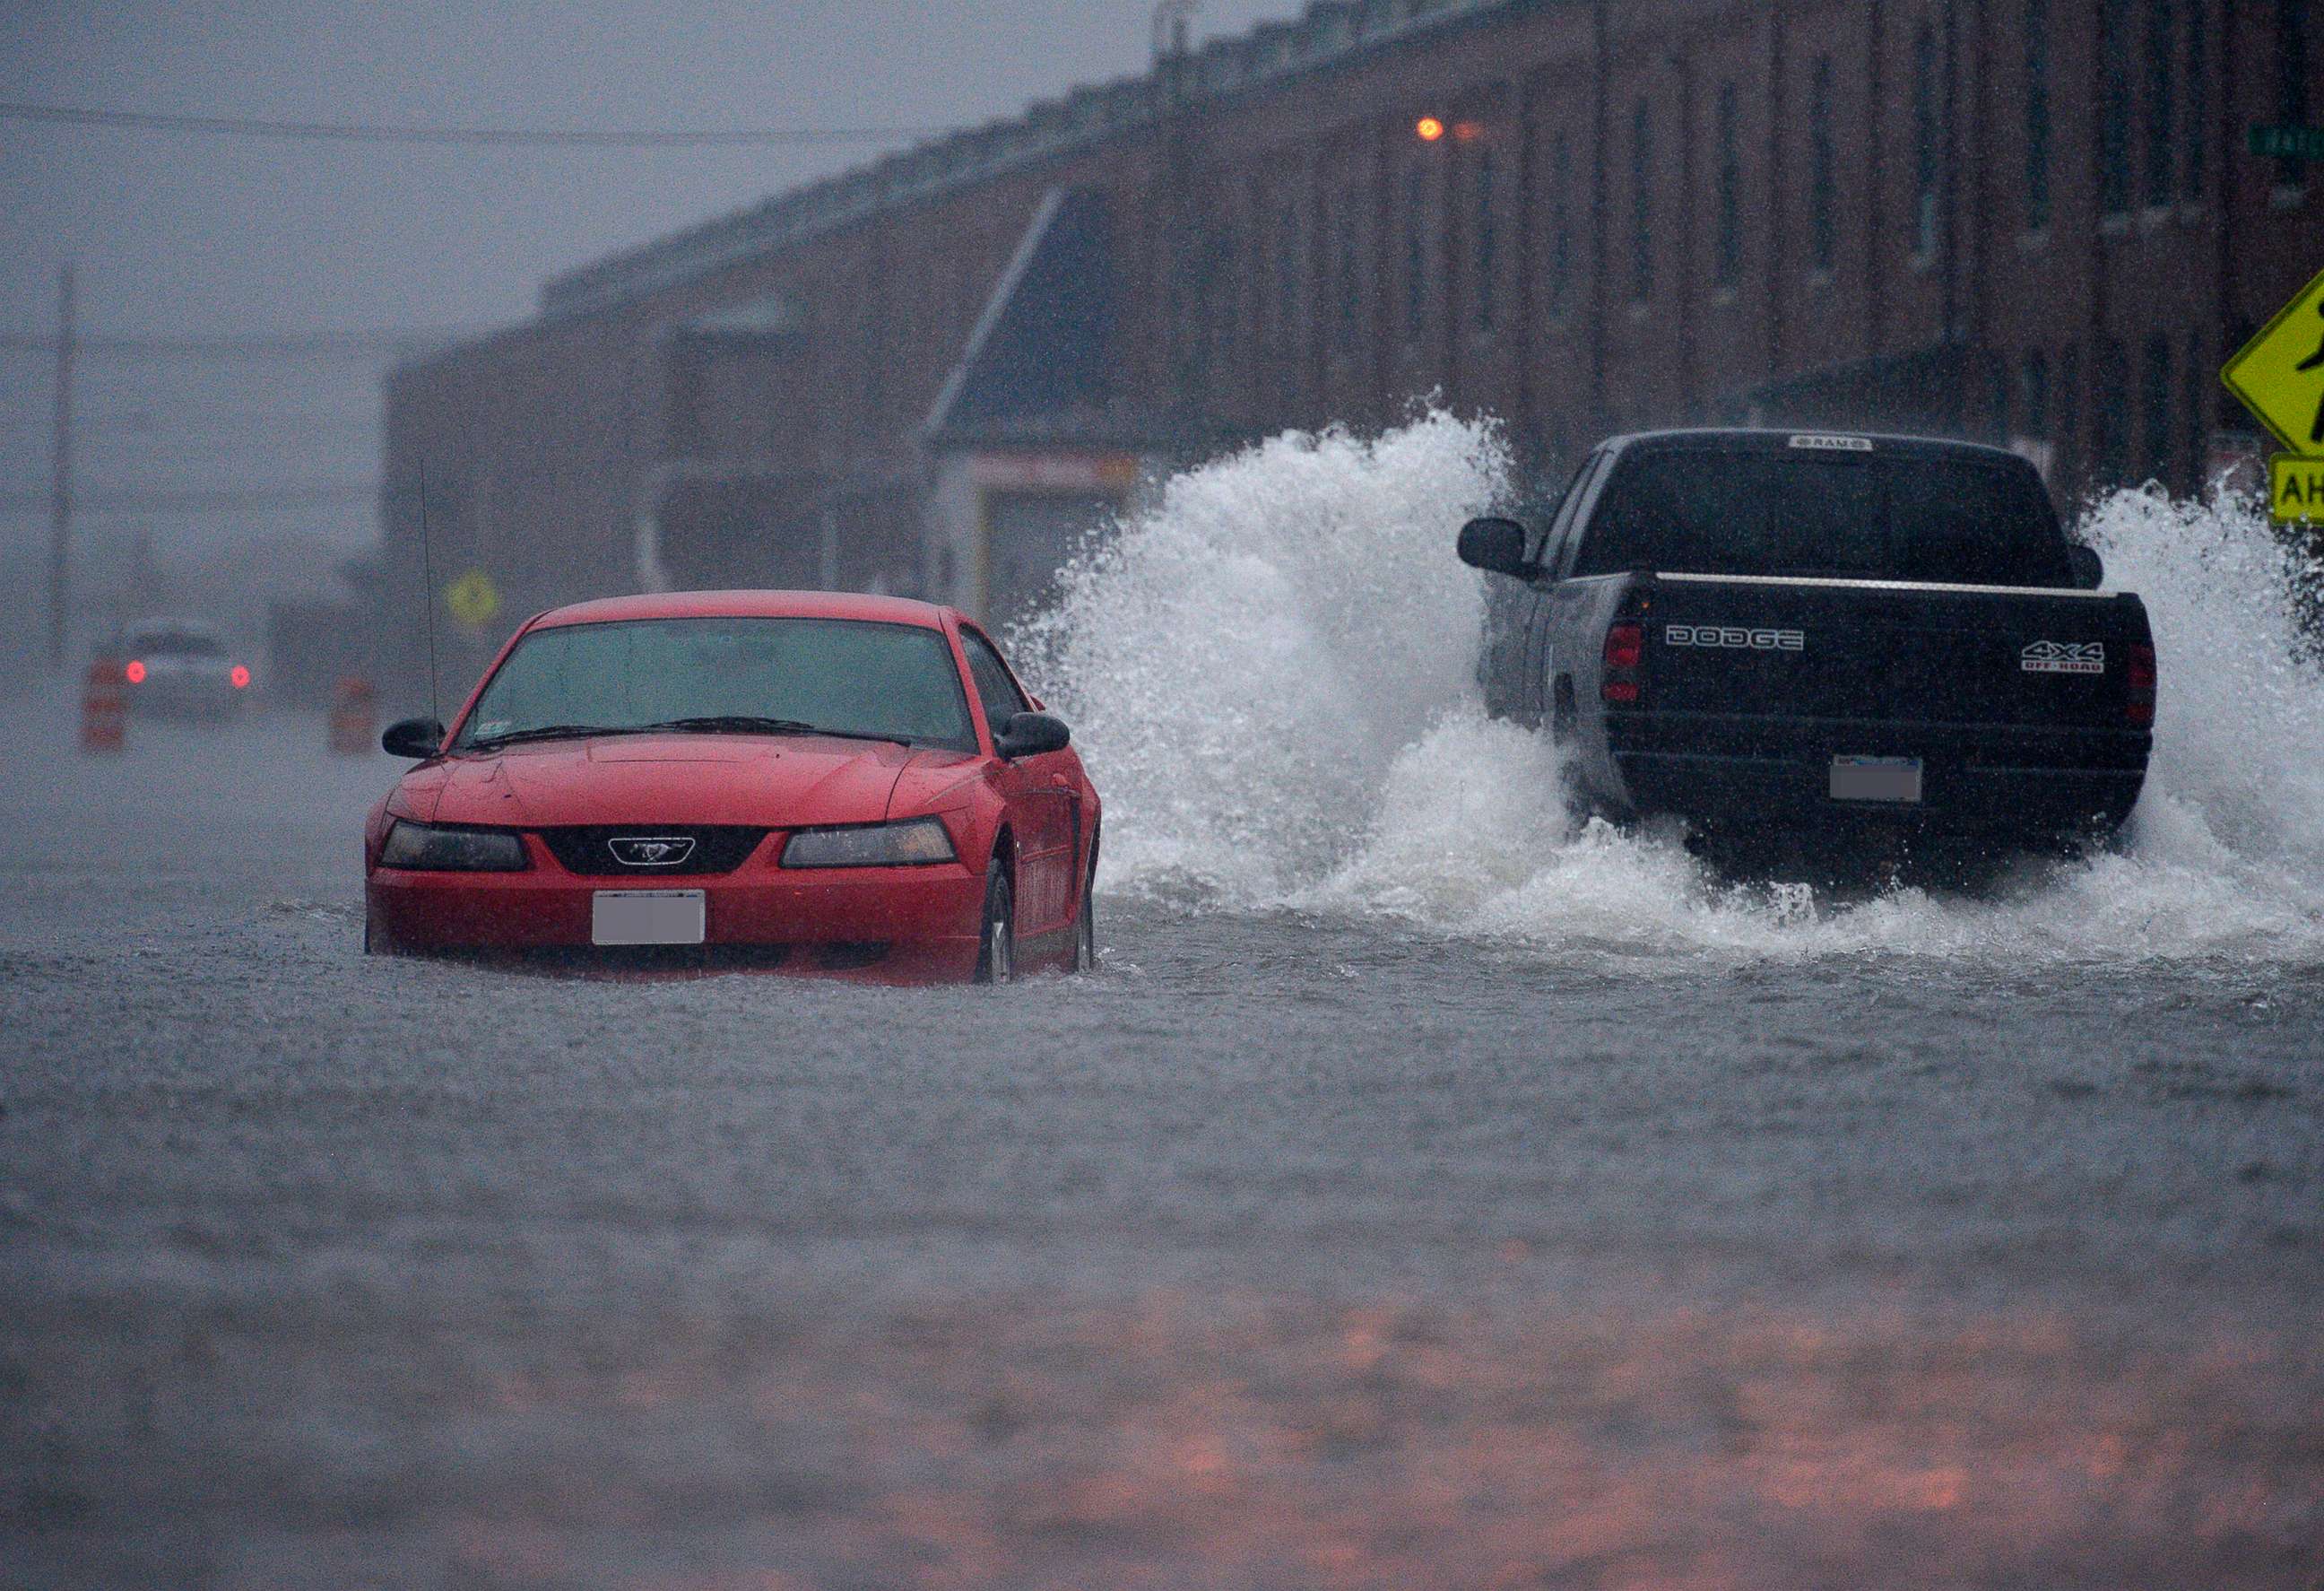 PHOTO: In this July 4, 2014, file photo, a pick-up truck makes its way pass an abandoned car in New Bedford, Mass., which were flooded by the heavy rains brought in by Hurricane Arthur.